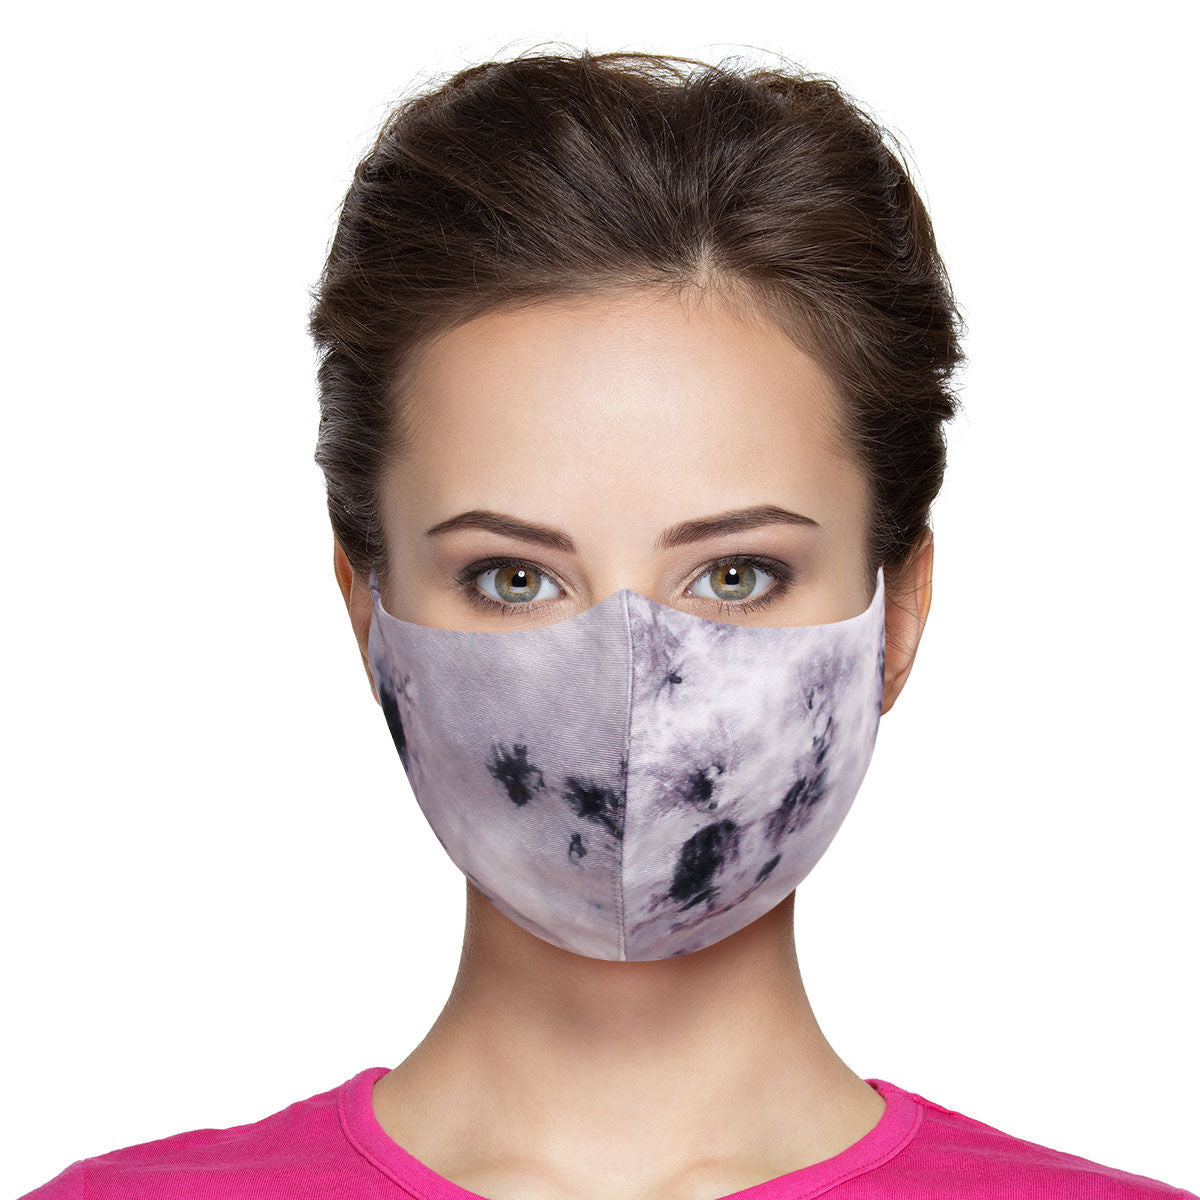 Gray and Black Tie Dye Mask